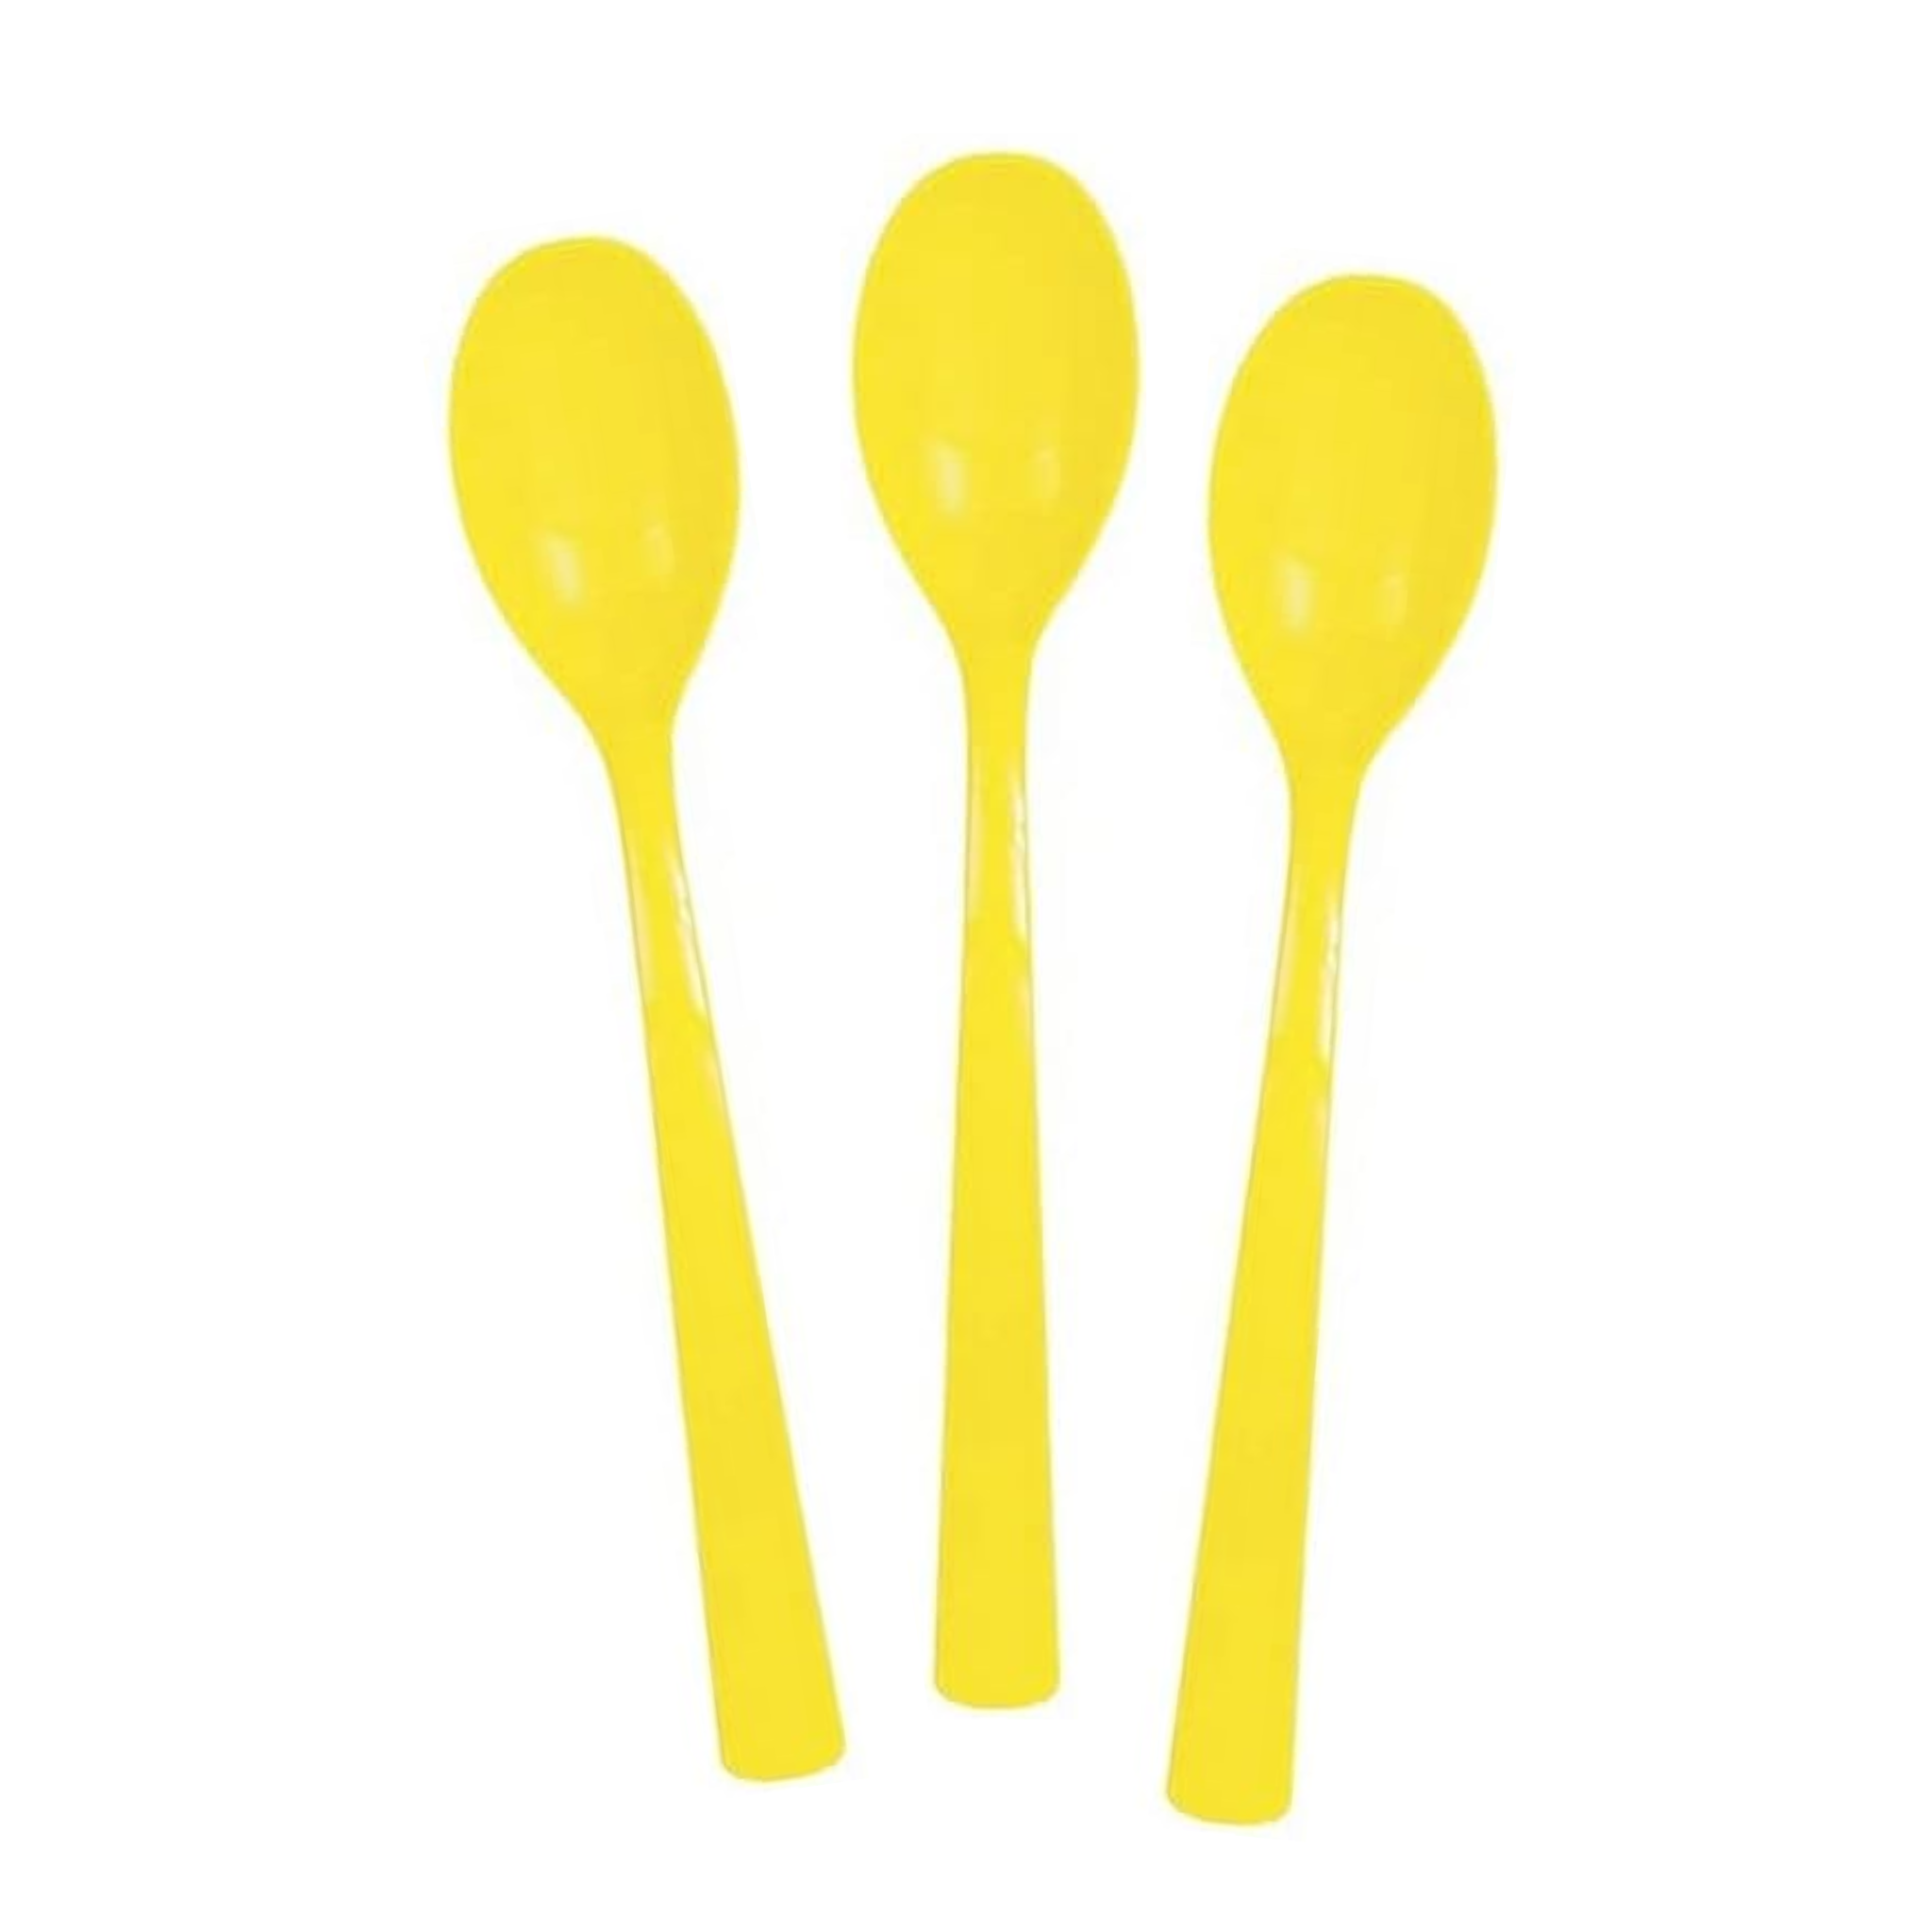 Gold Football Theme Birthday Party Cutlery Set (Spoons)